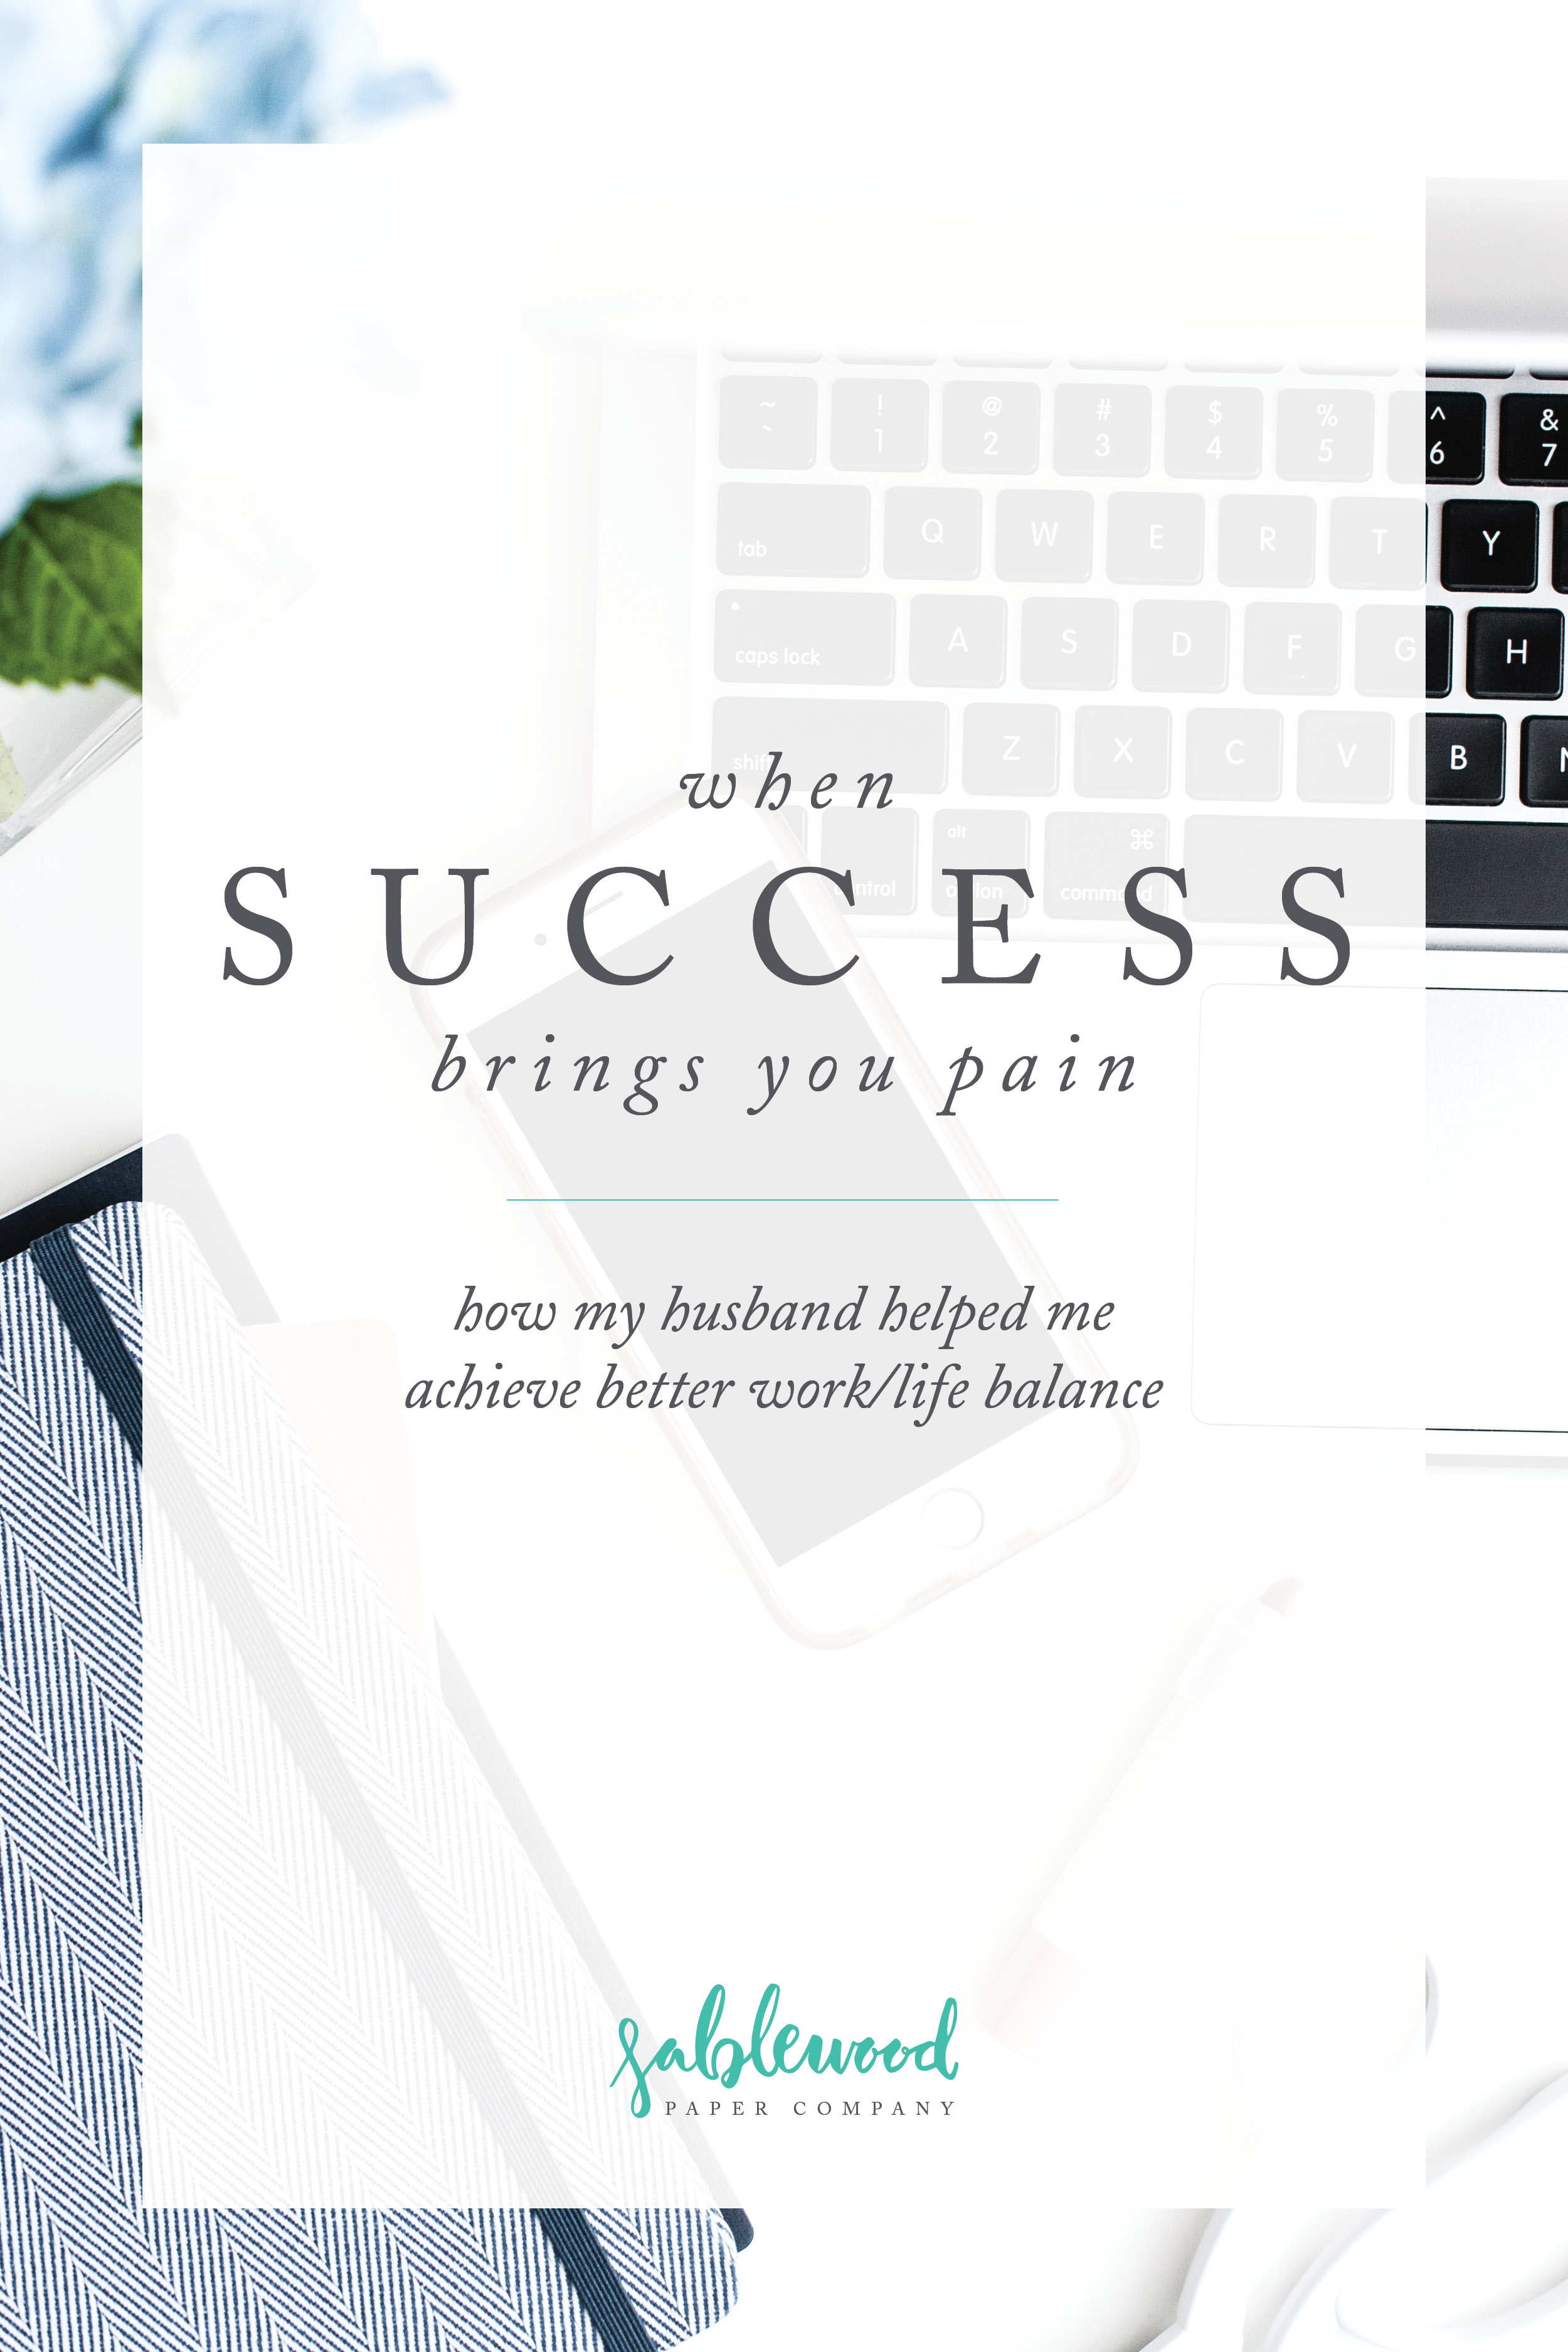 When Success Brings You Pain | seattle stationery and calligraphy